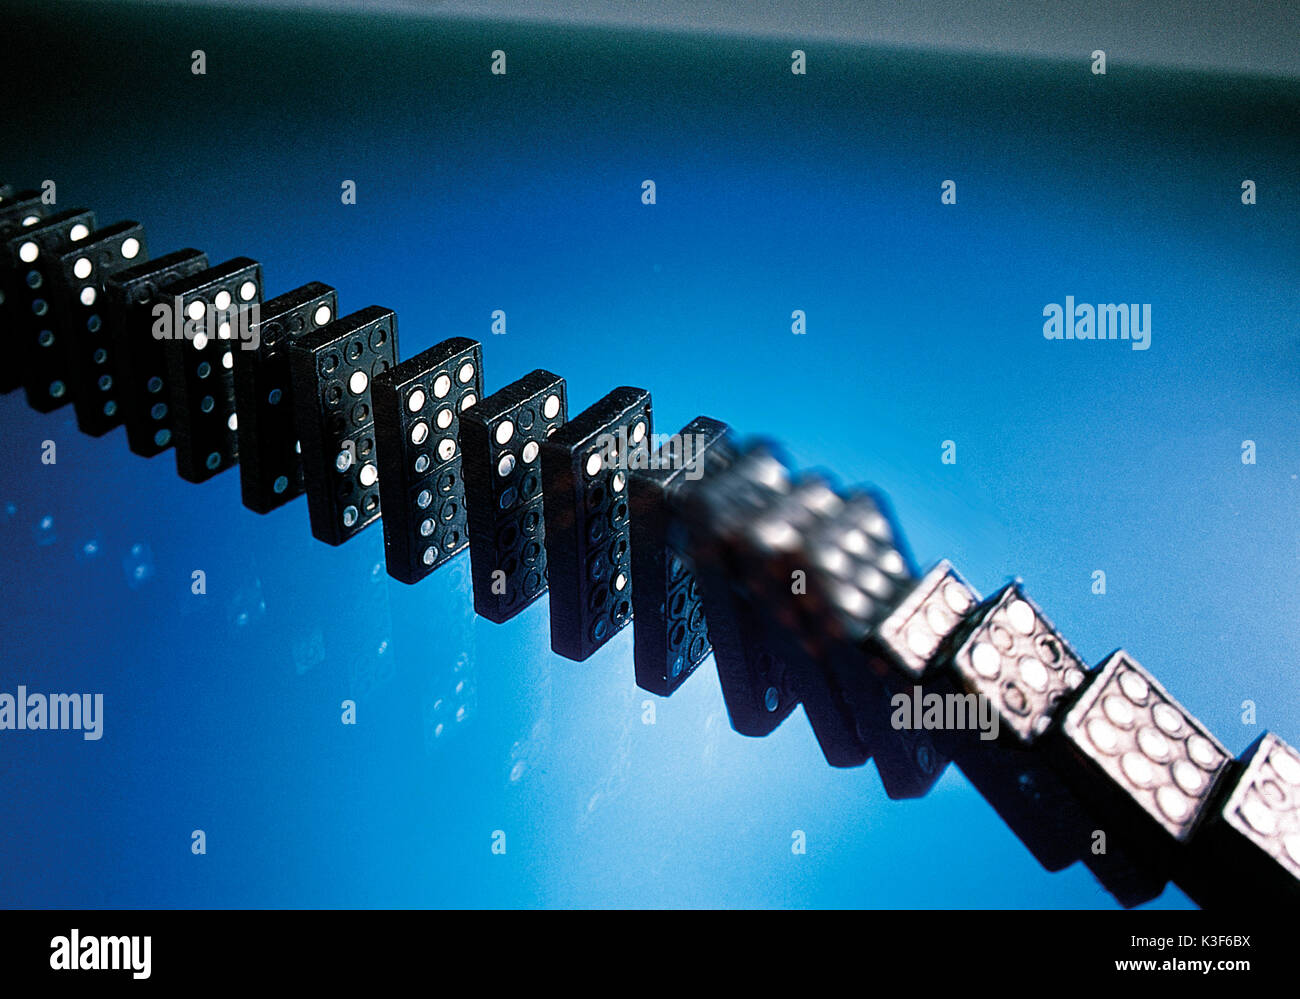 Series of dominos falling Stock Photo